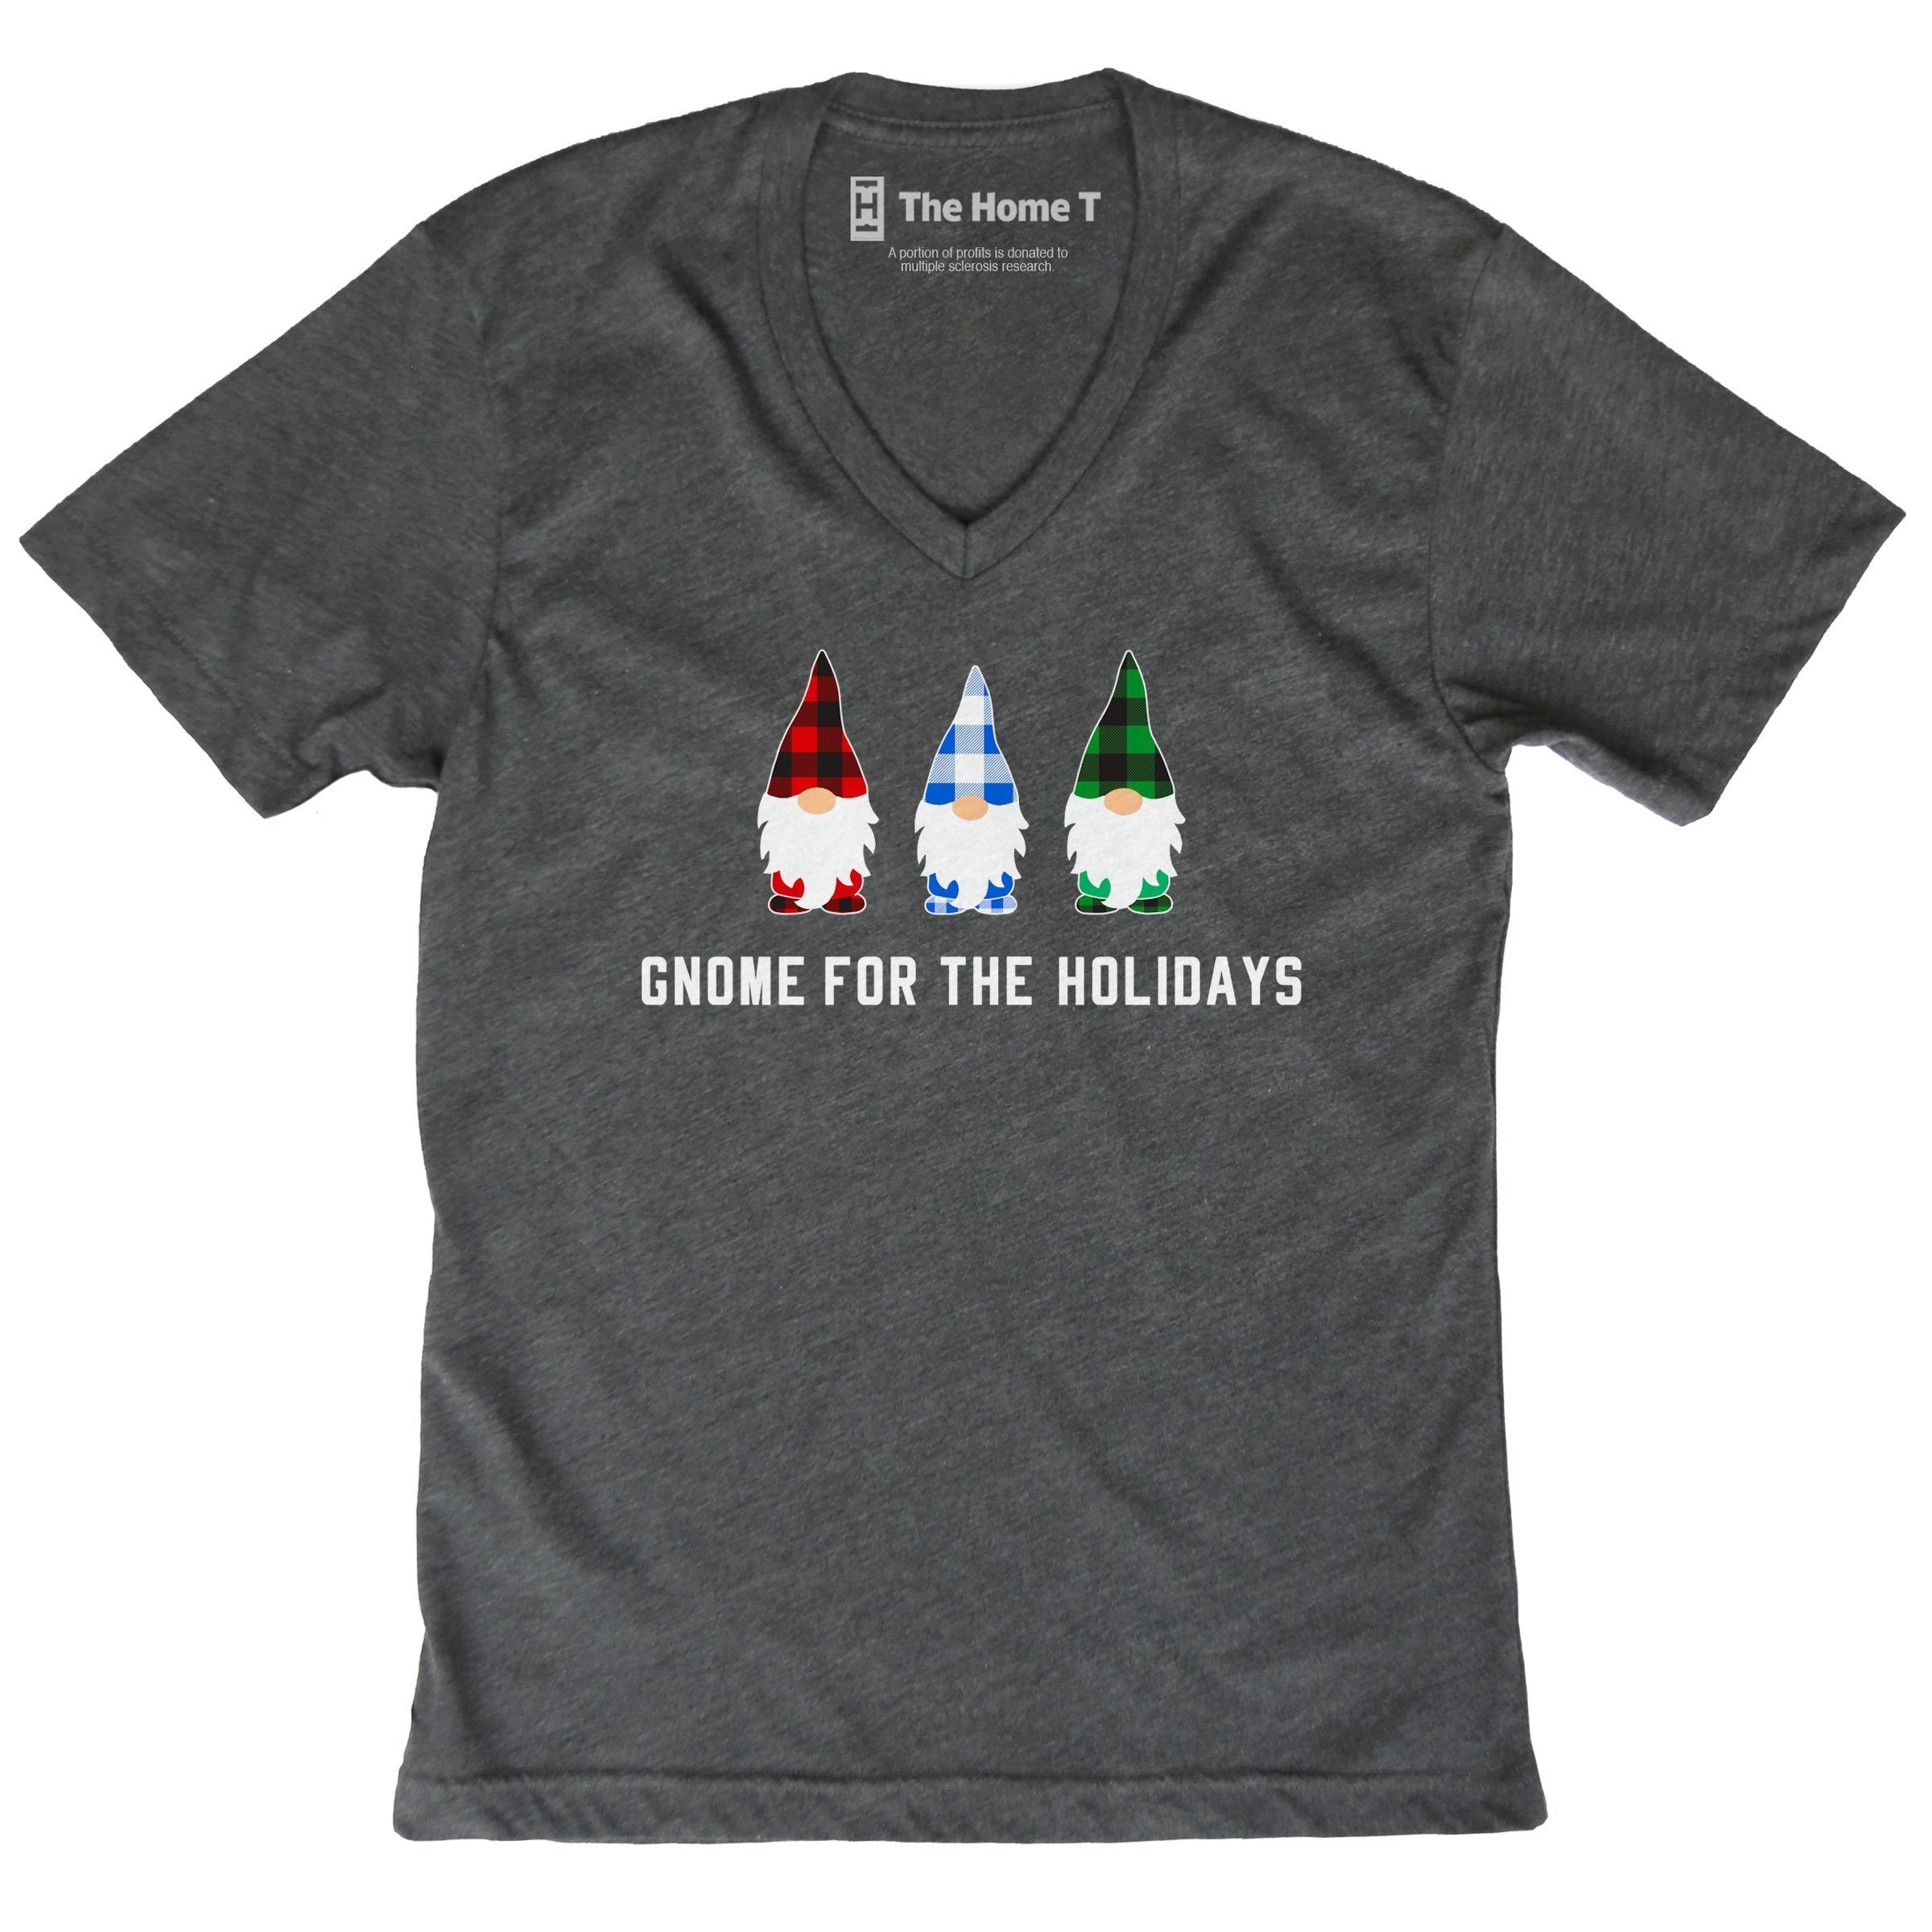 Gnome for the Holidays Crew neck The Home T